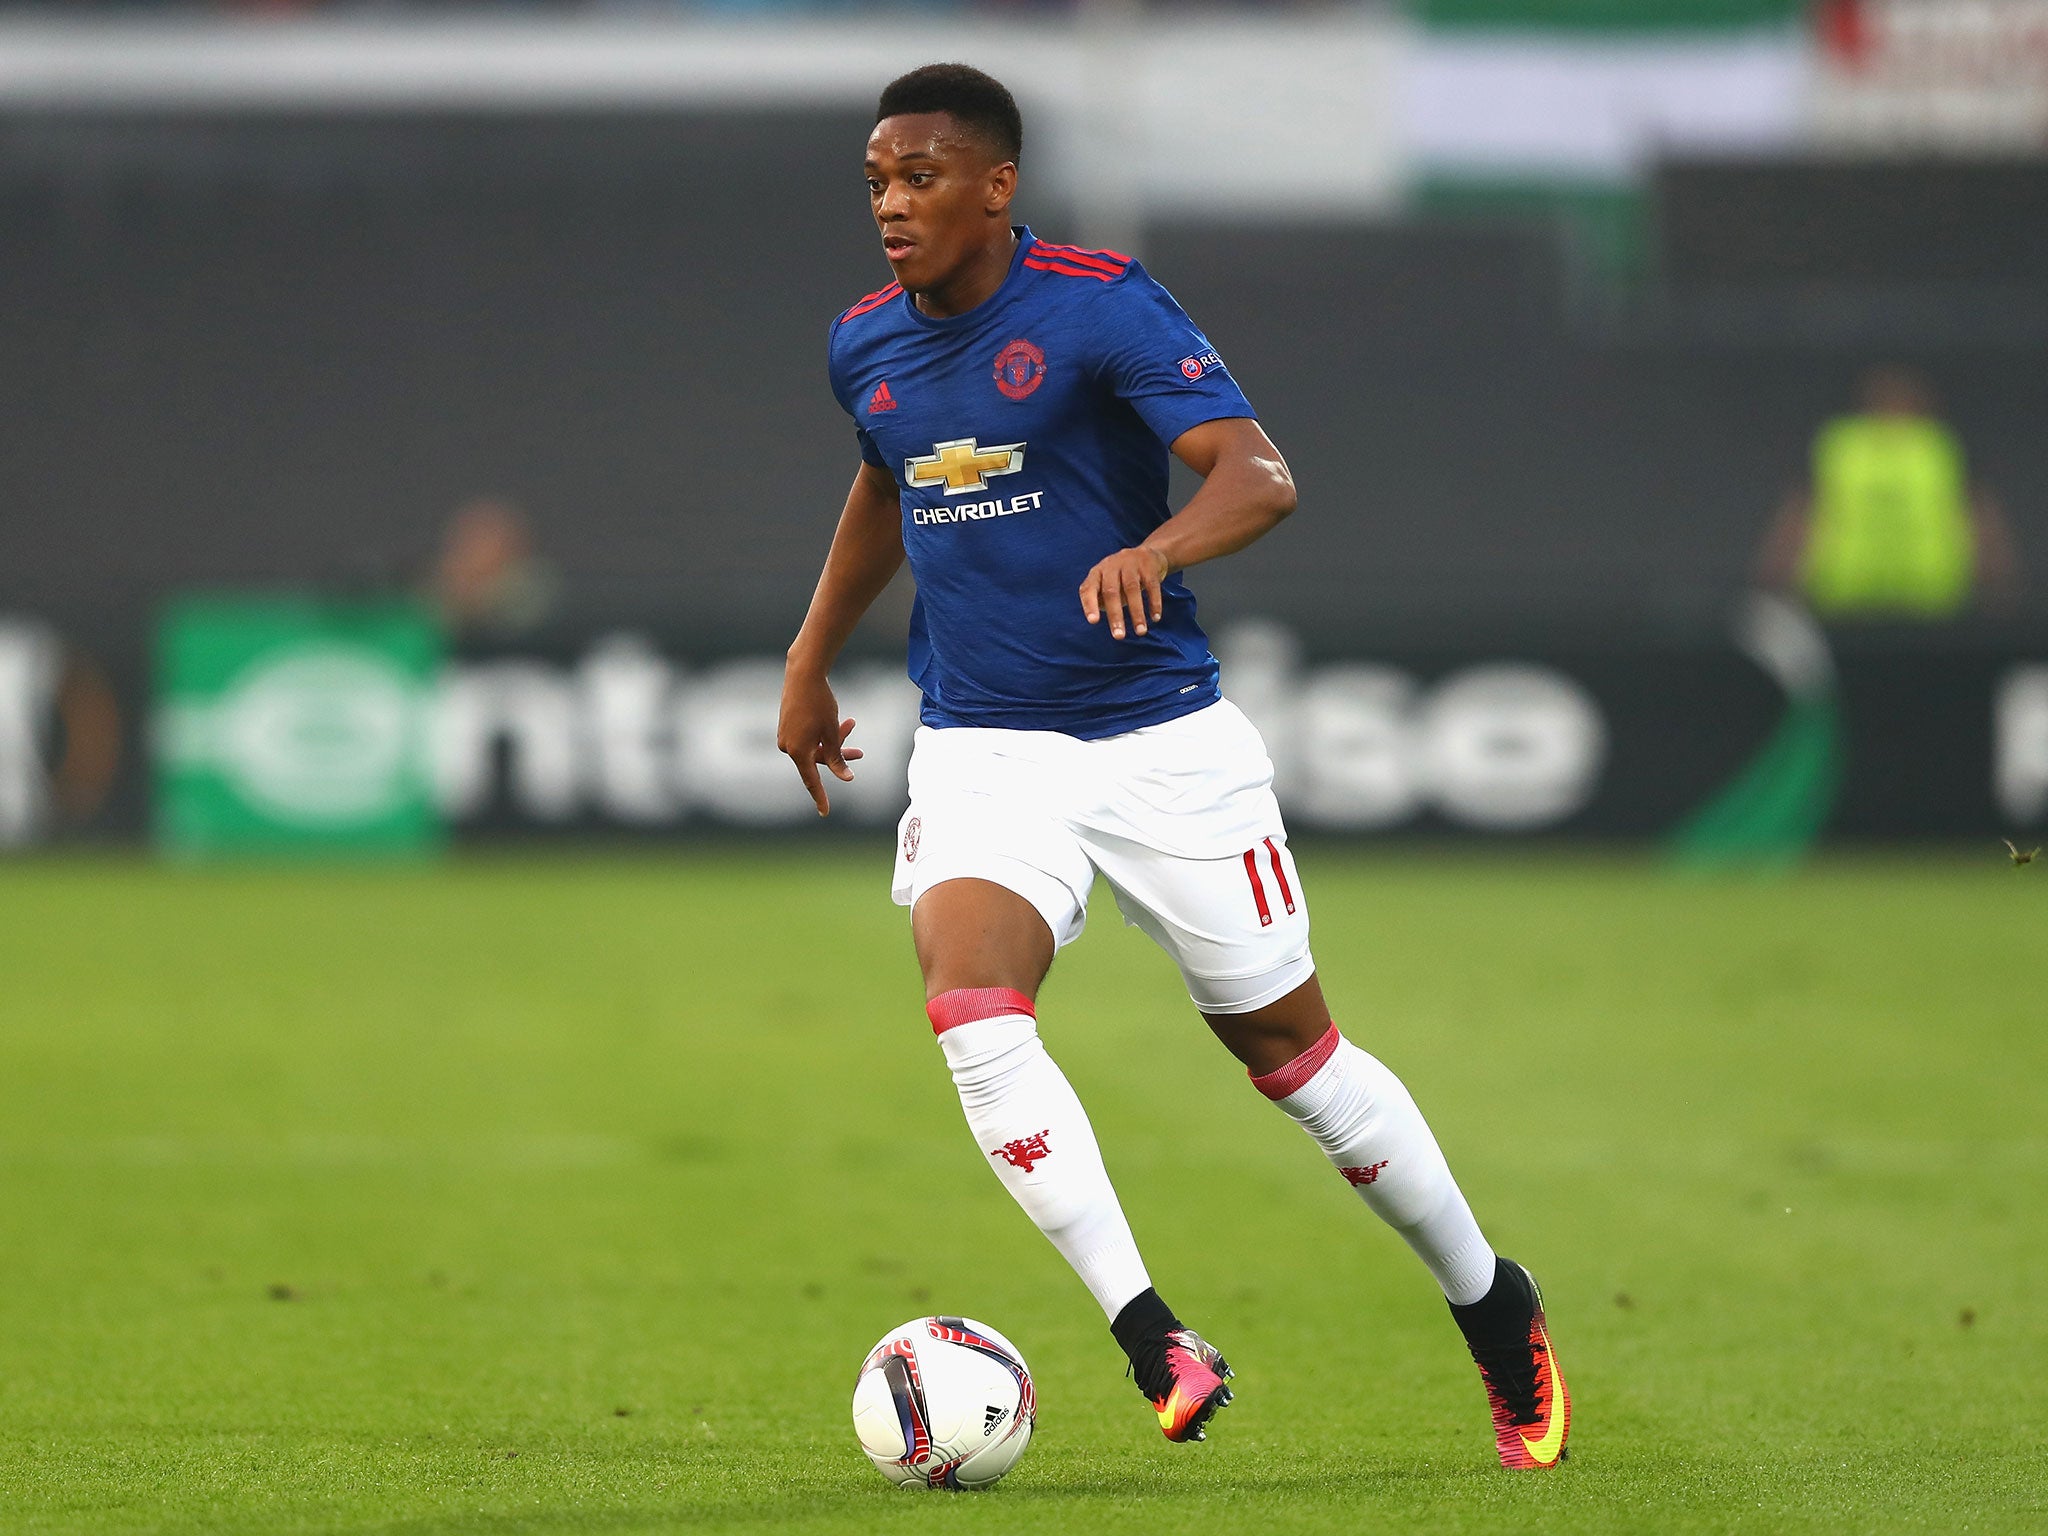 Martial struggled to pose a threat up front